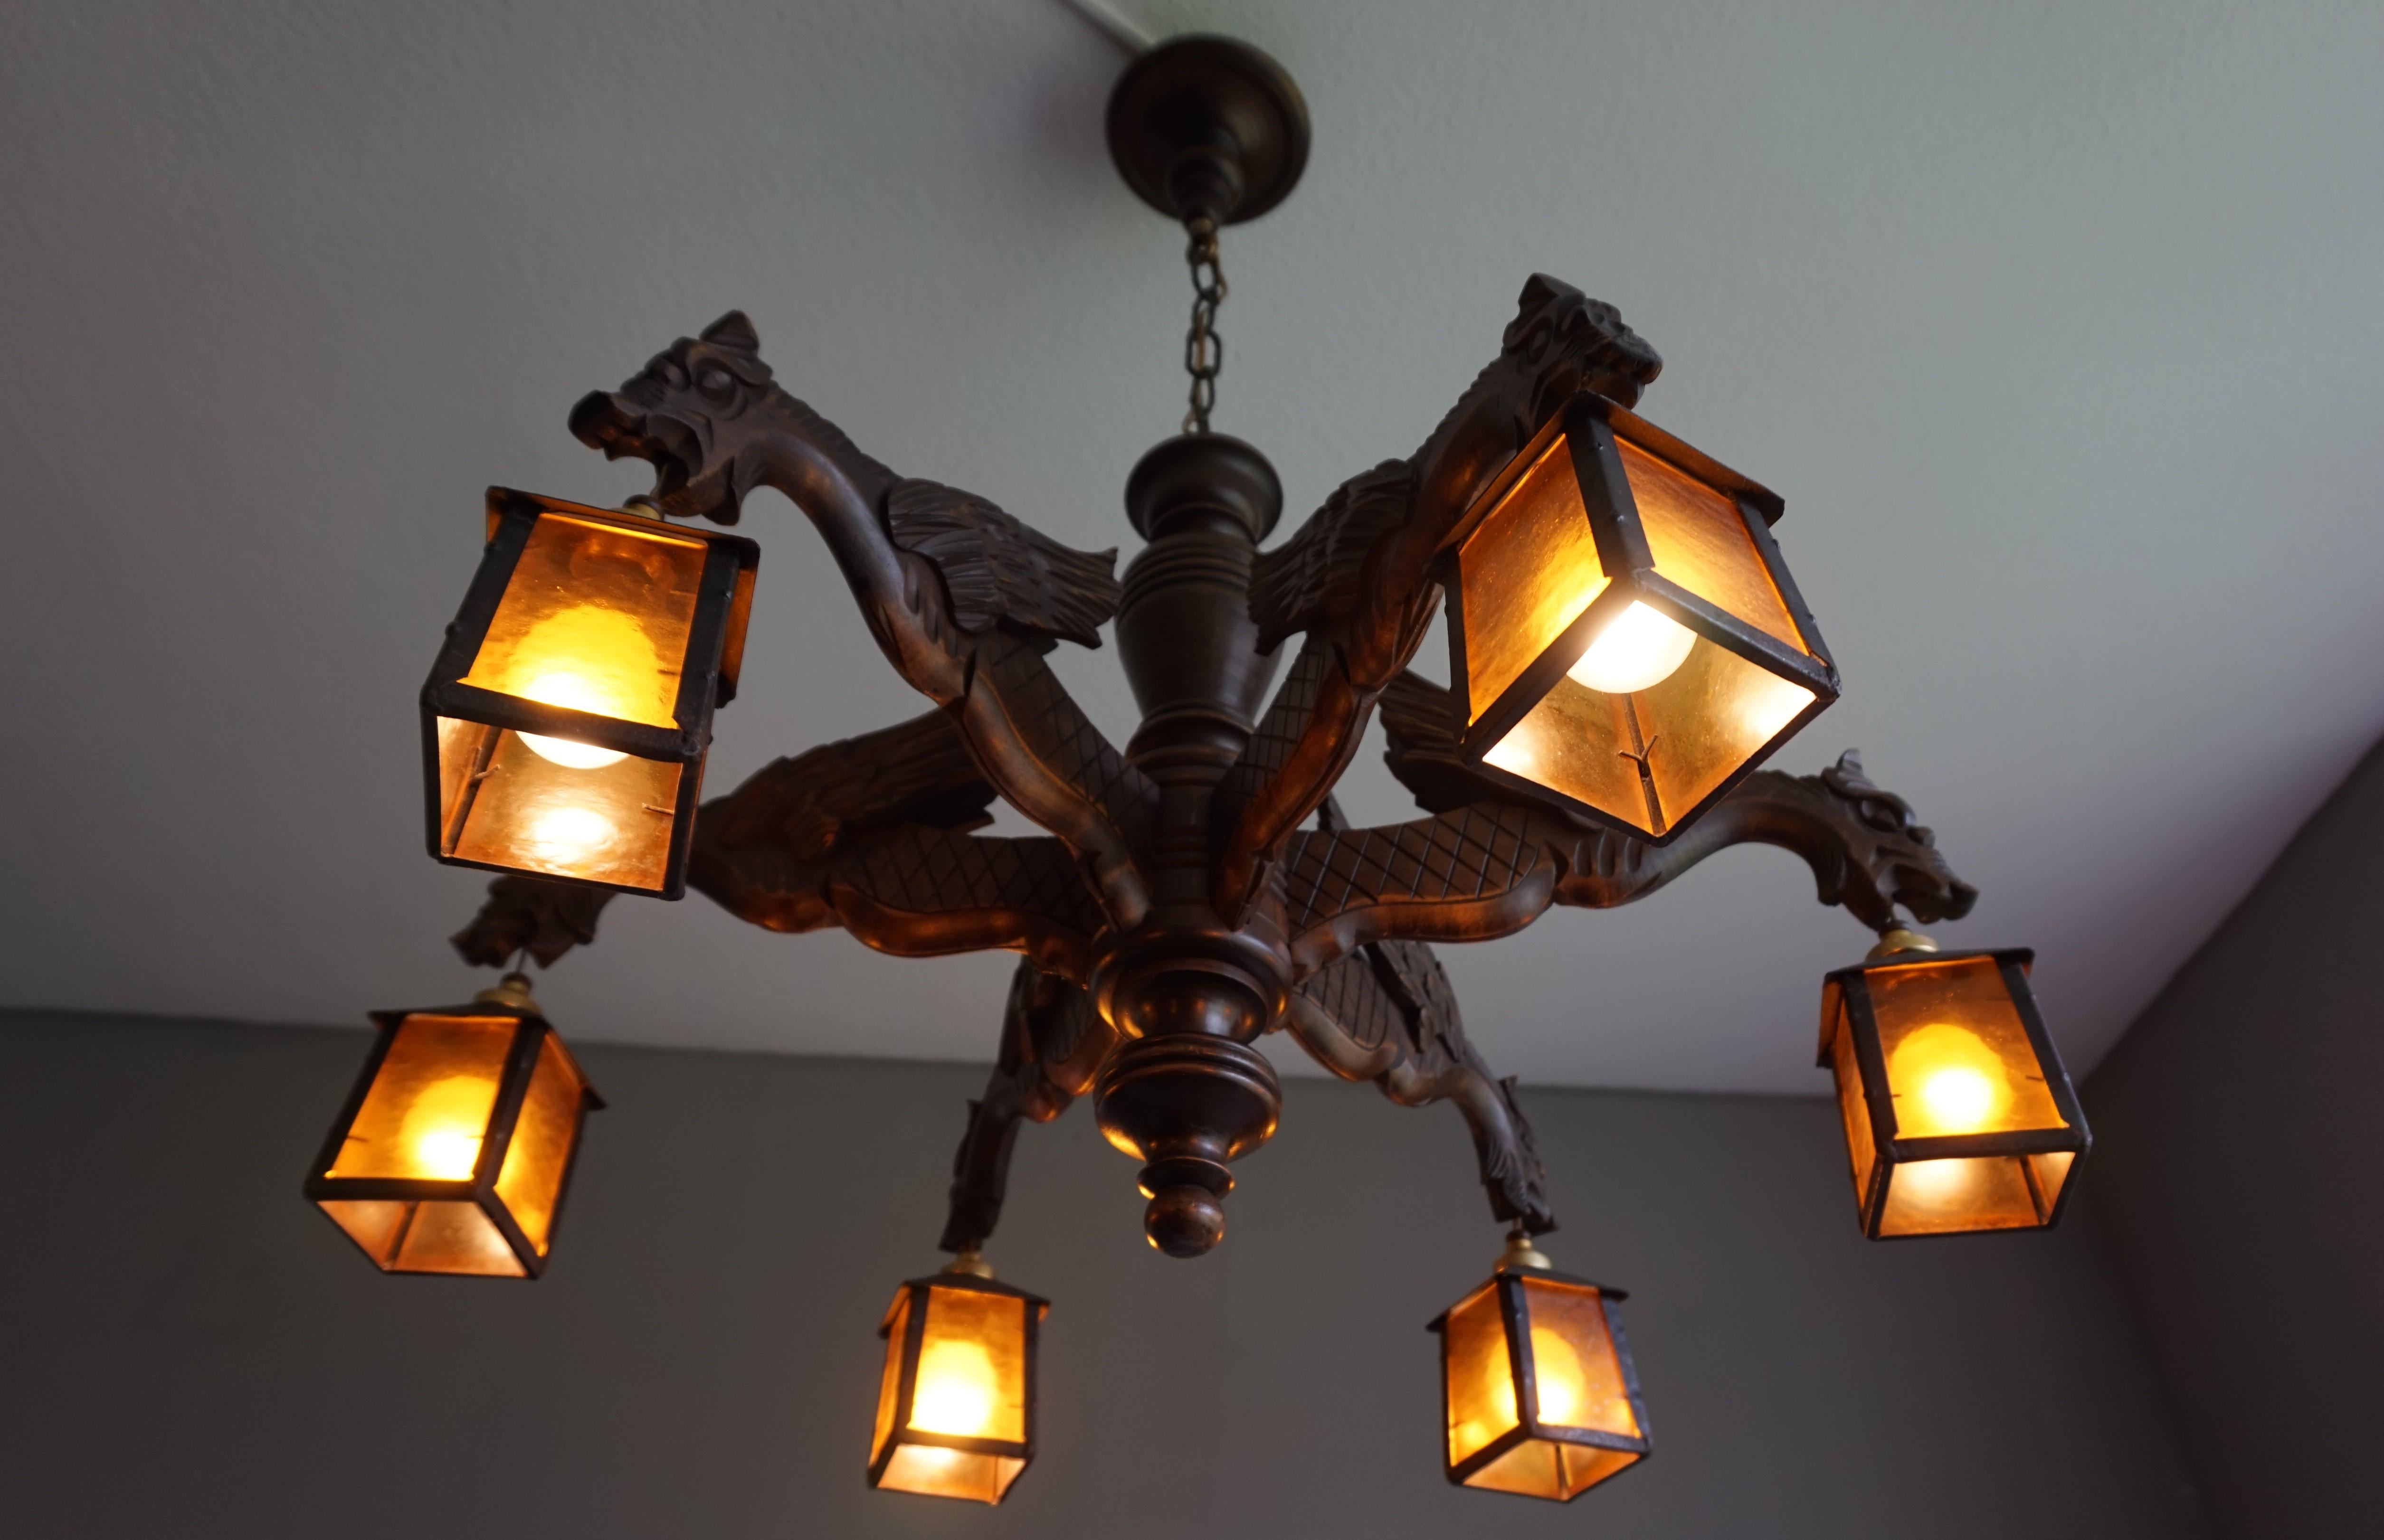 Antique wooden light fixture with dragons and hand forged, wrought iron lanterns.

This handcrafted, excellent condition chandelier comes with six stunning and well carved, winged dragon arms. Protruding like mediëval gargoyles on the ledge of a